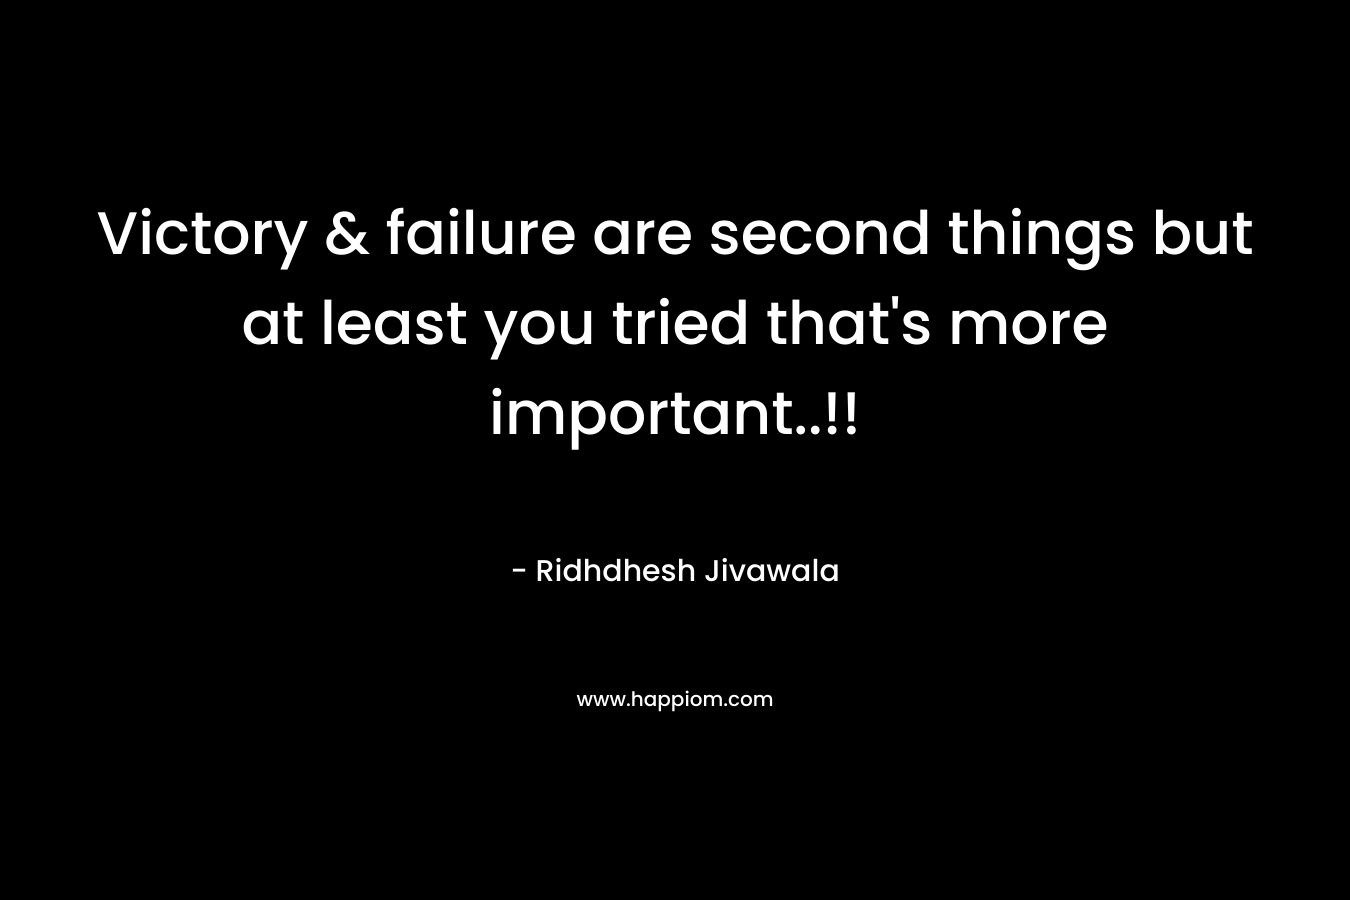 Victory & failure are second things but at least you tried that's more important..!!